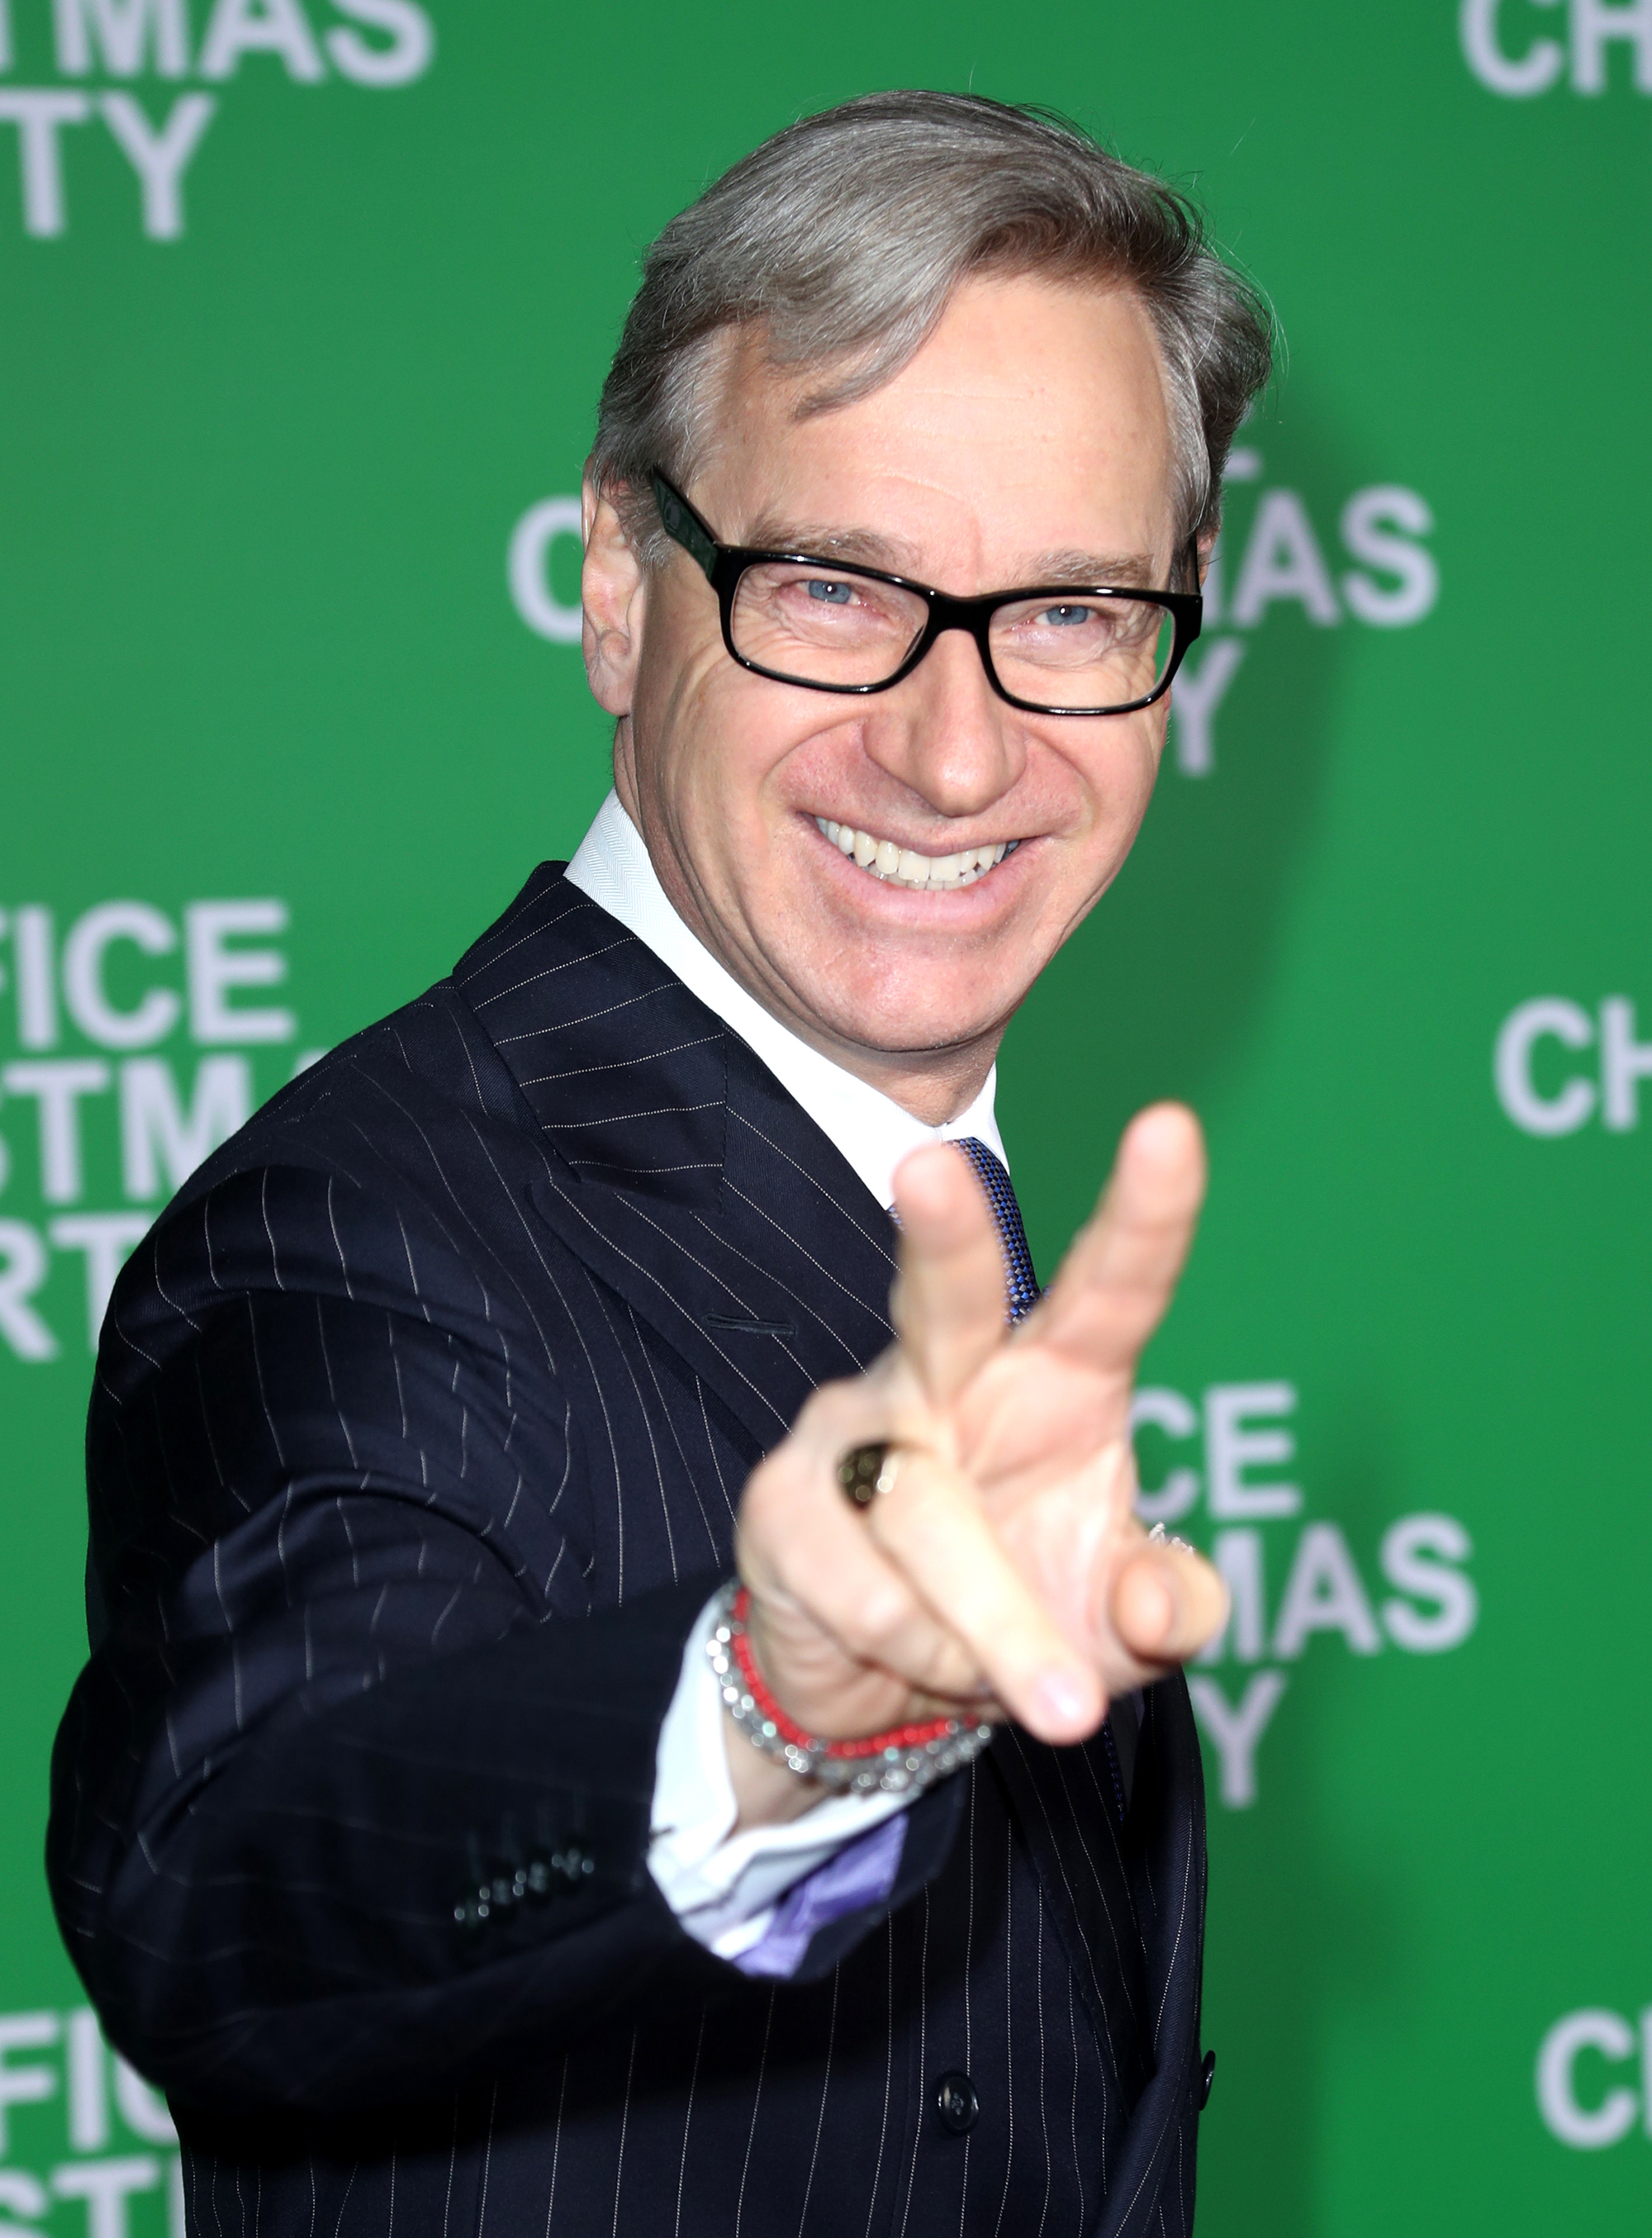 WESTWOOD, CA - DECEMBER 07:  Director Paul Feig attends the LA Premiere of Paramount Pictures "Office Christmas Party" at Regency Village Theatre on December 7, 2016 in Westwood, California.  (Photo by Jonathan Leibson/Getty Images for Paramount Pictures) *** Local Caption *** Paul Feig